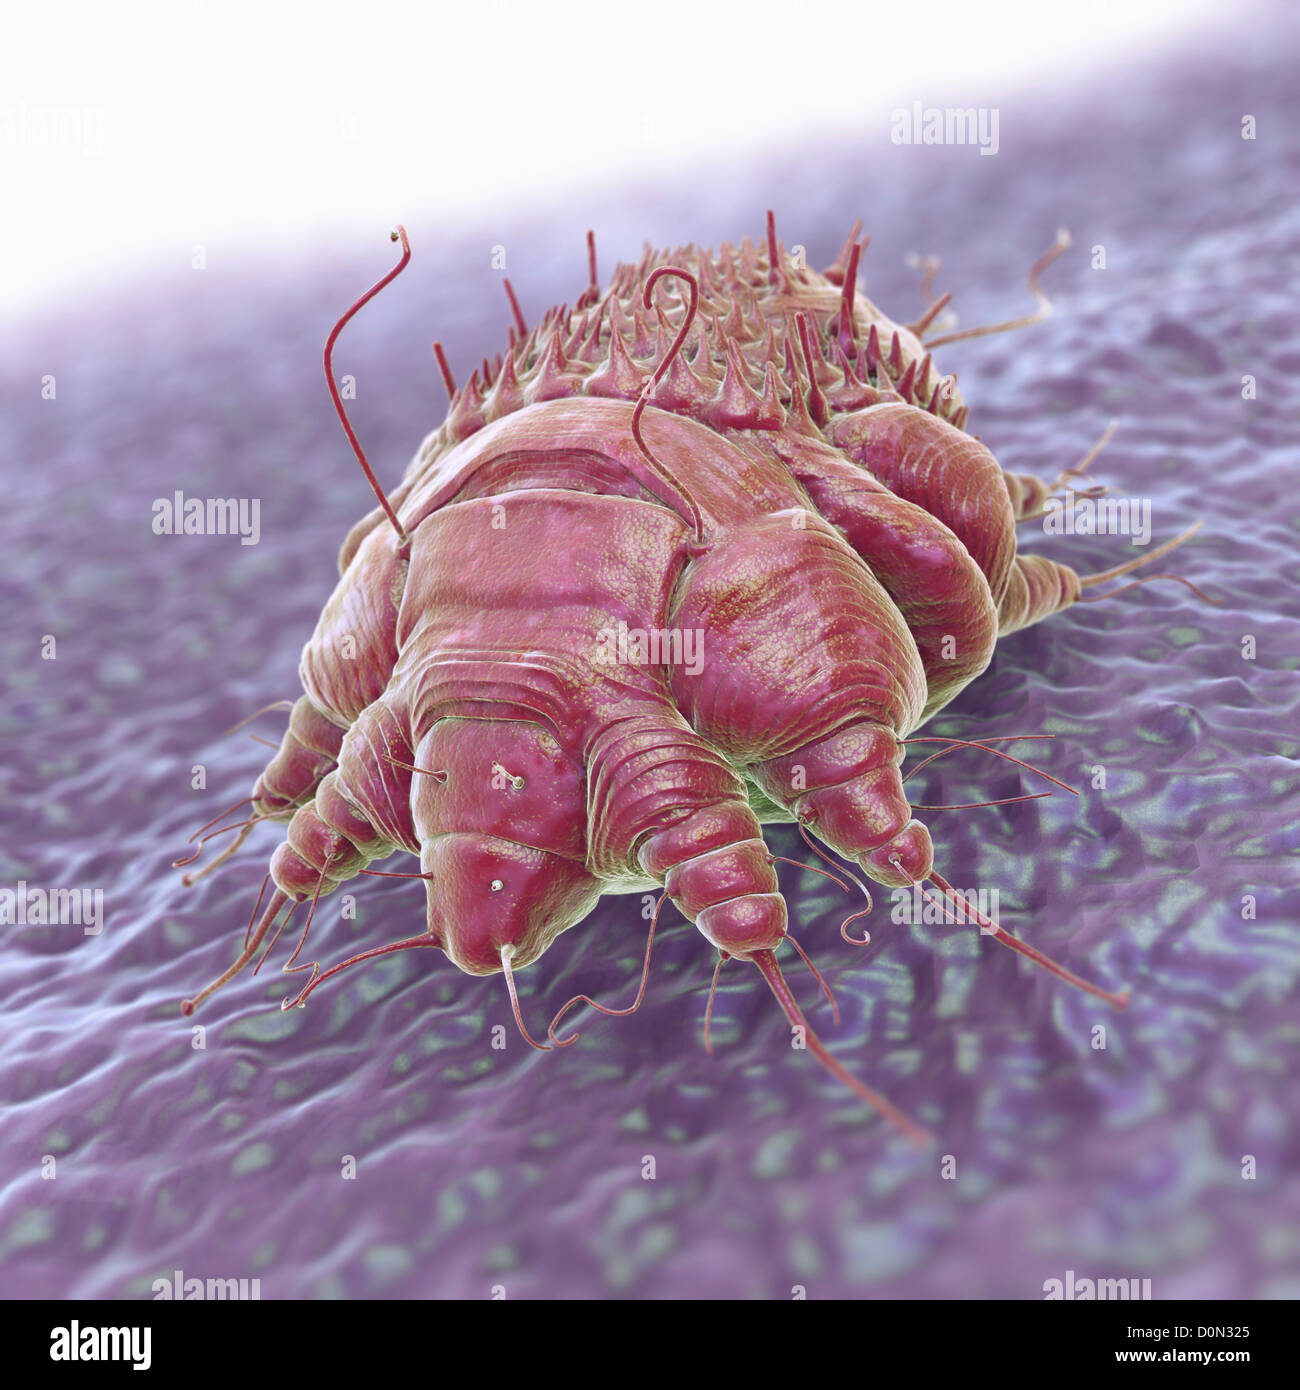 A single Sarcoptes scabiei mite which is cause contagious skin infection Scabies. mite burrows under host's skin causing Stock Photo